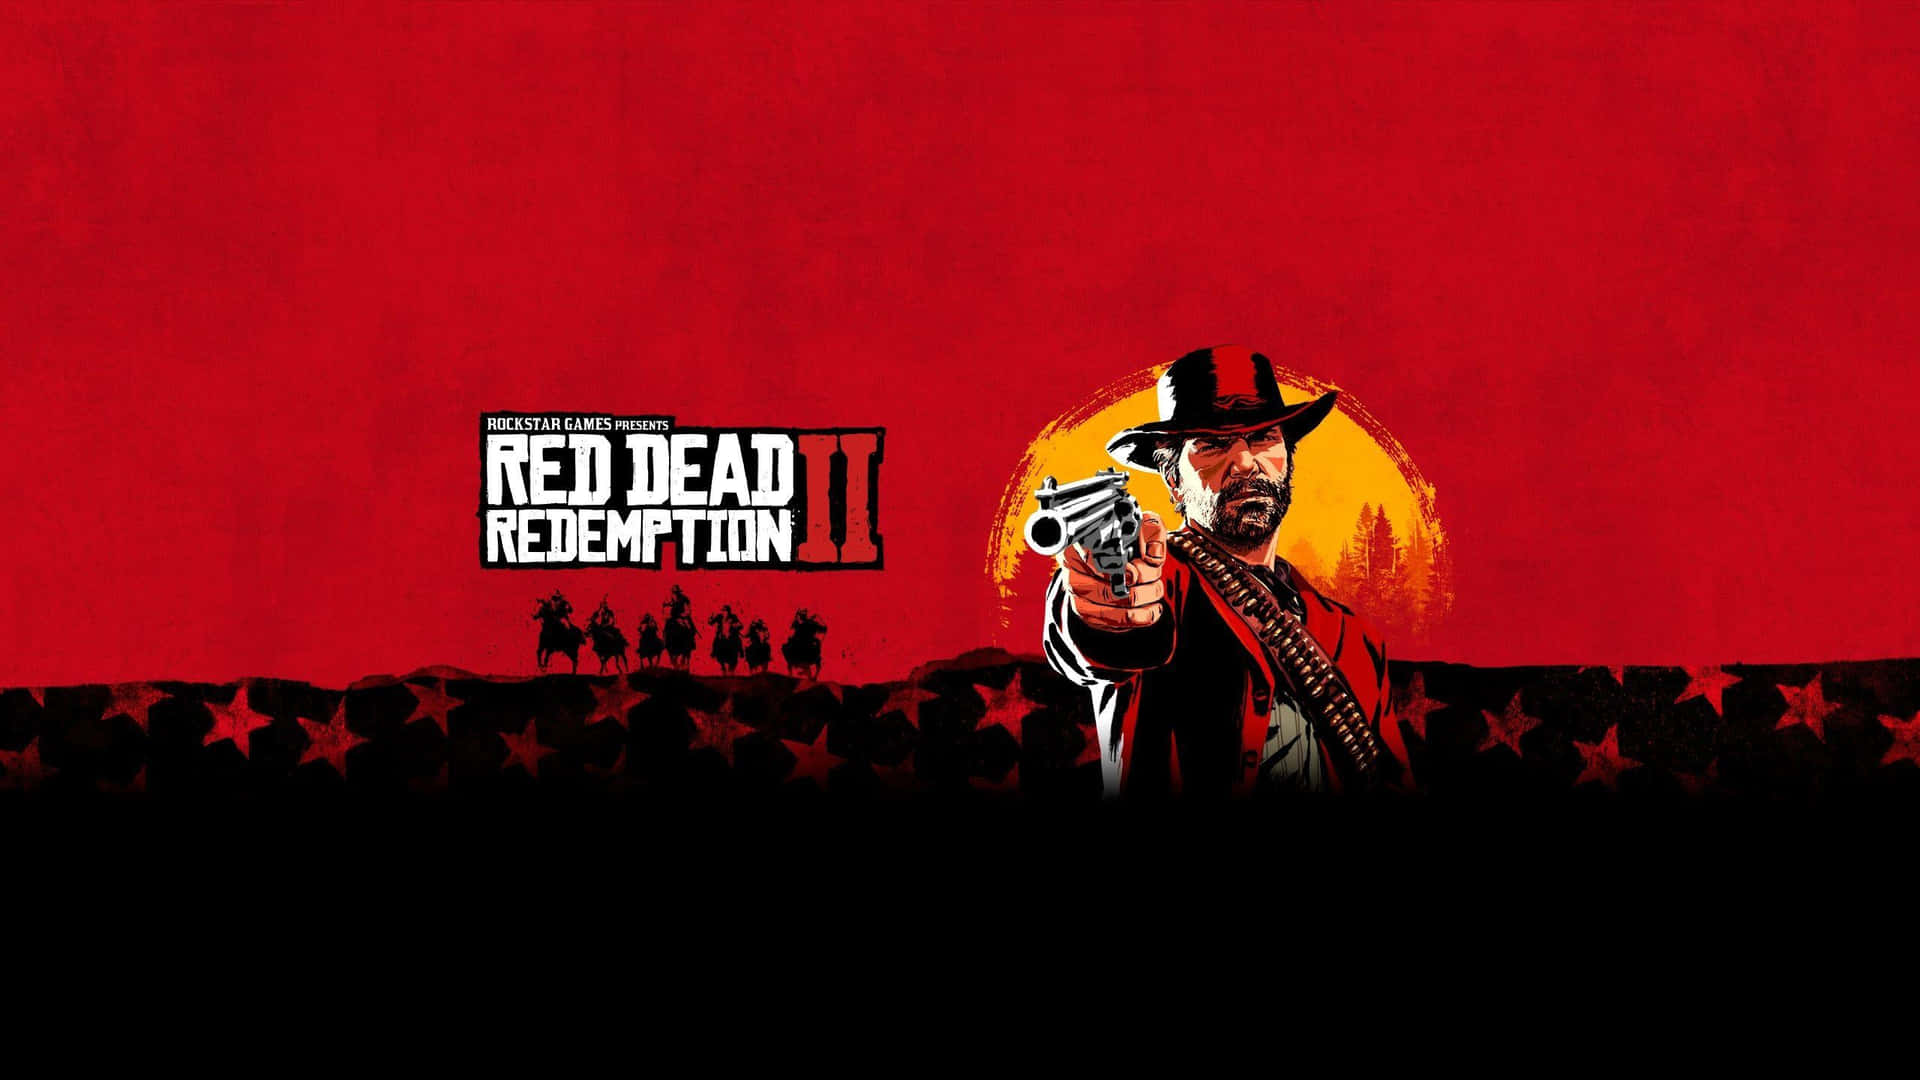 Get Ready to Ride with Red Dead Redemption 2 in Full HD Wallpaper